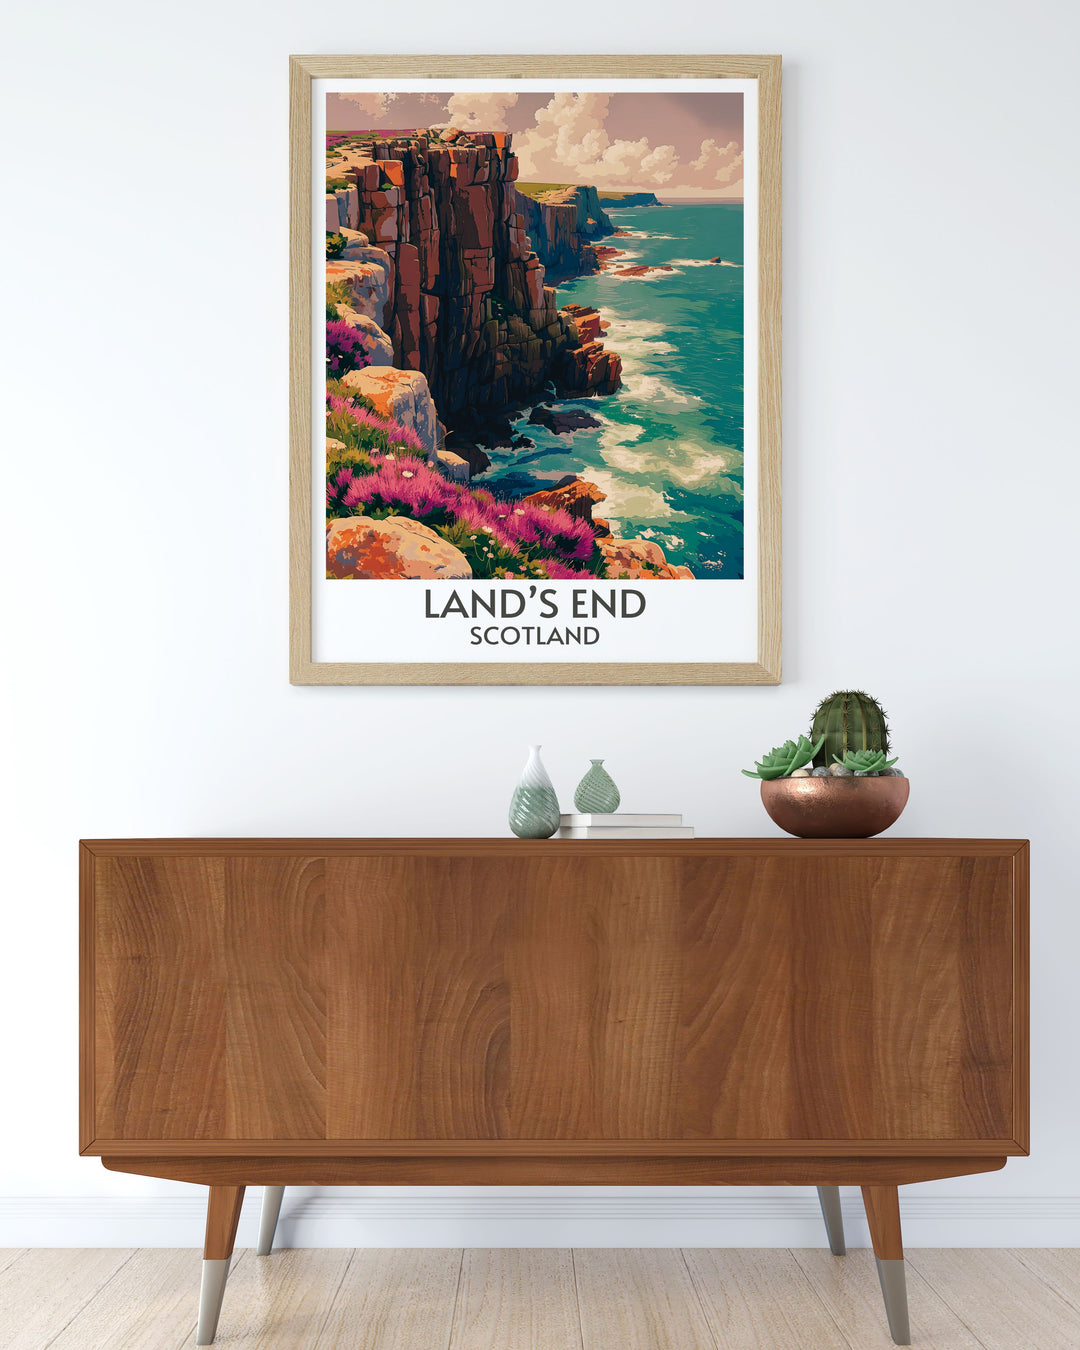 England Custom Prints allow you to personalize your space with your favorite locations. Capture the bustling streets of London, the serene countryside of the Cotswolds, or the majestic peaks of the Lake District, tailored to fit your style and space.